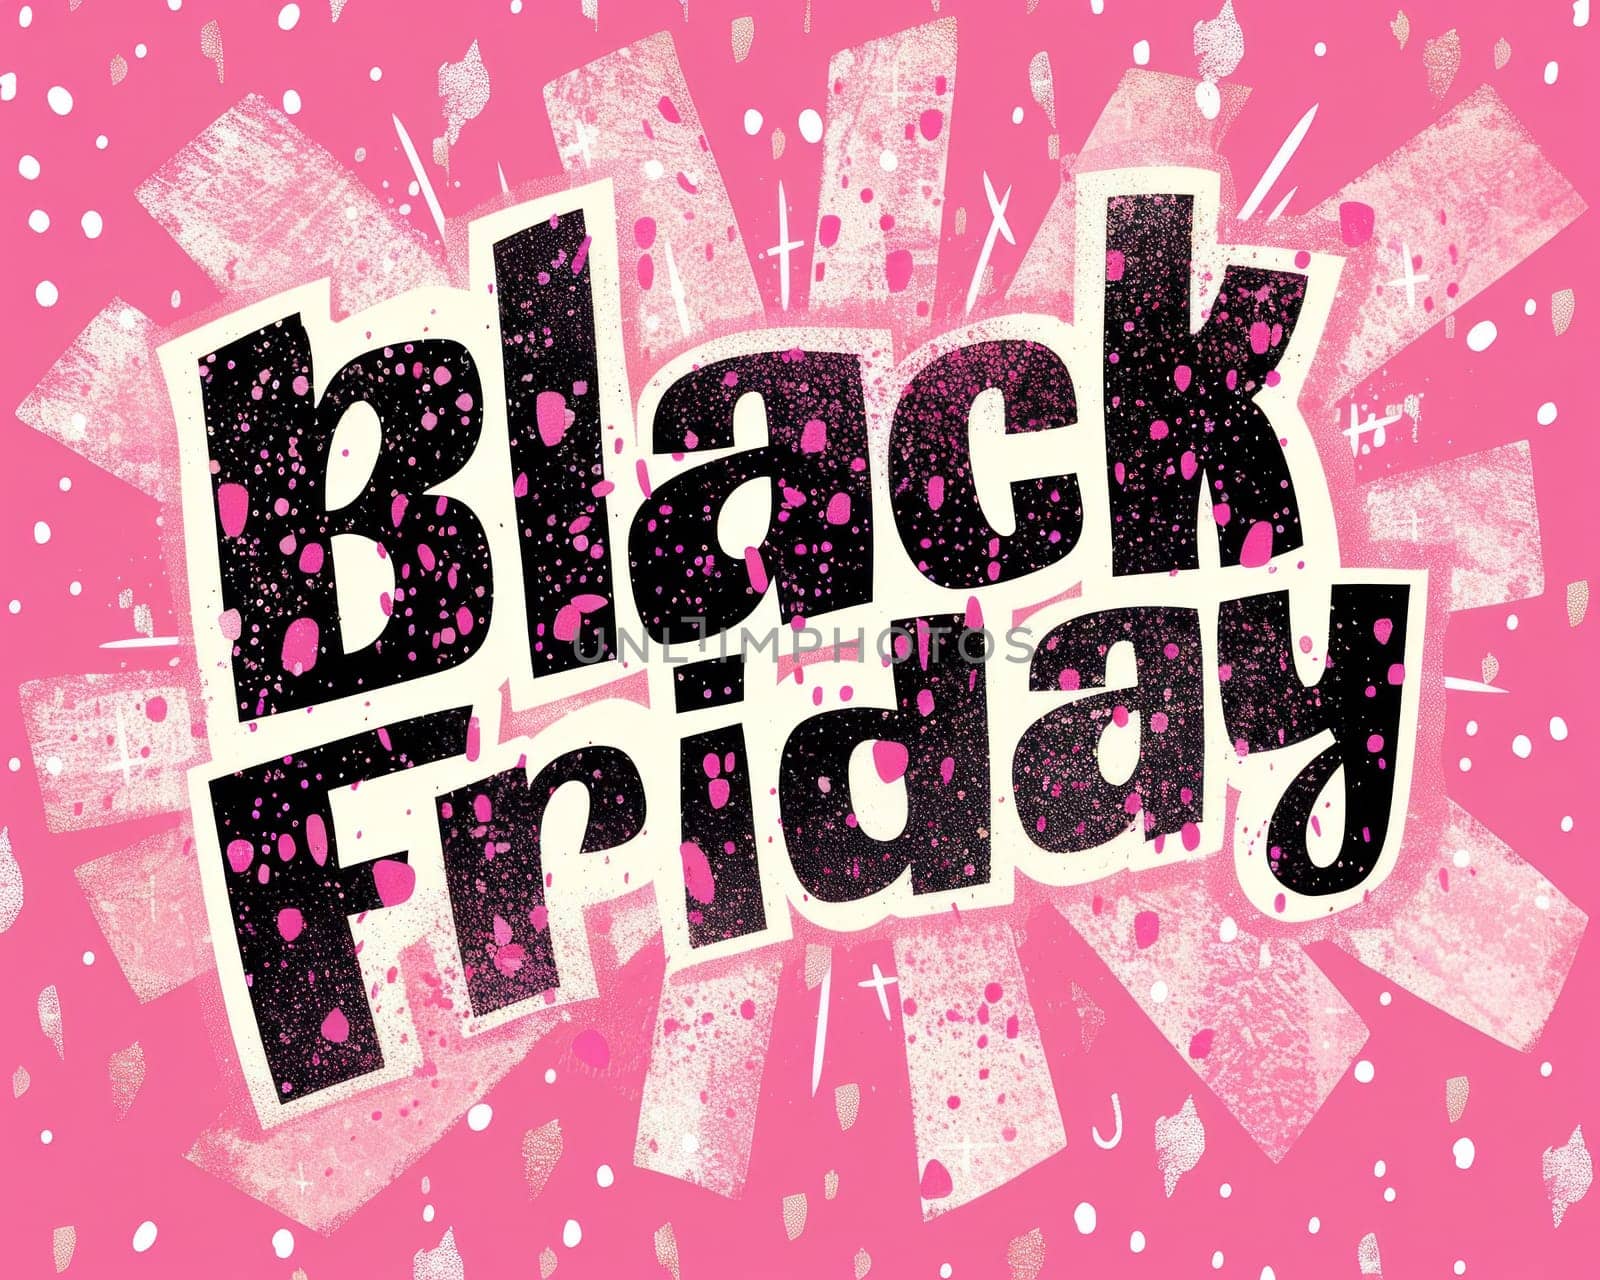 Black friday sale pink background with black splotches for beauty, fashion, business, and shopping themes